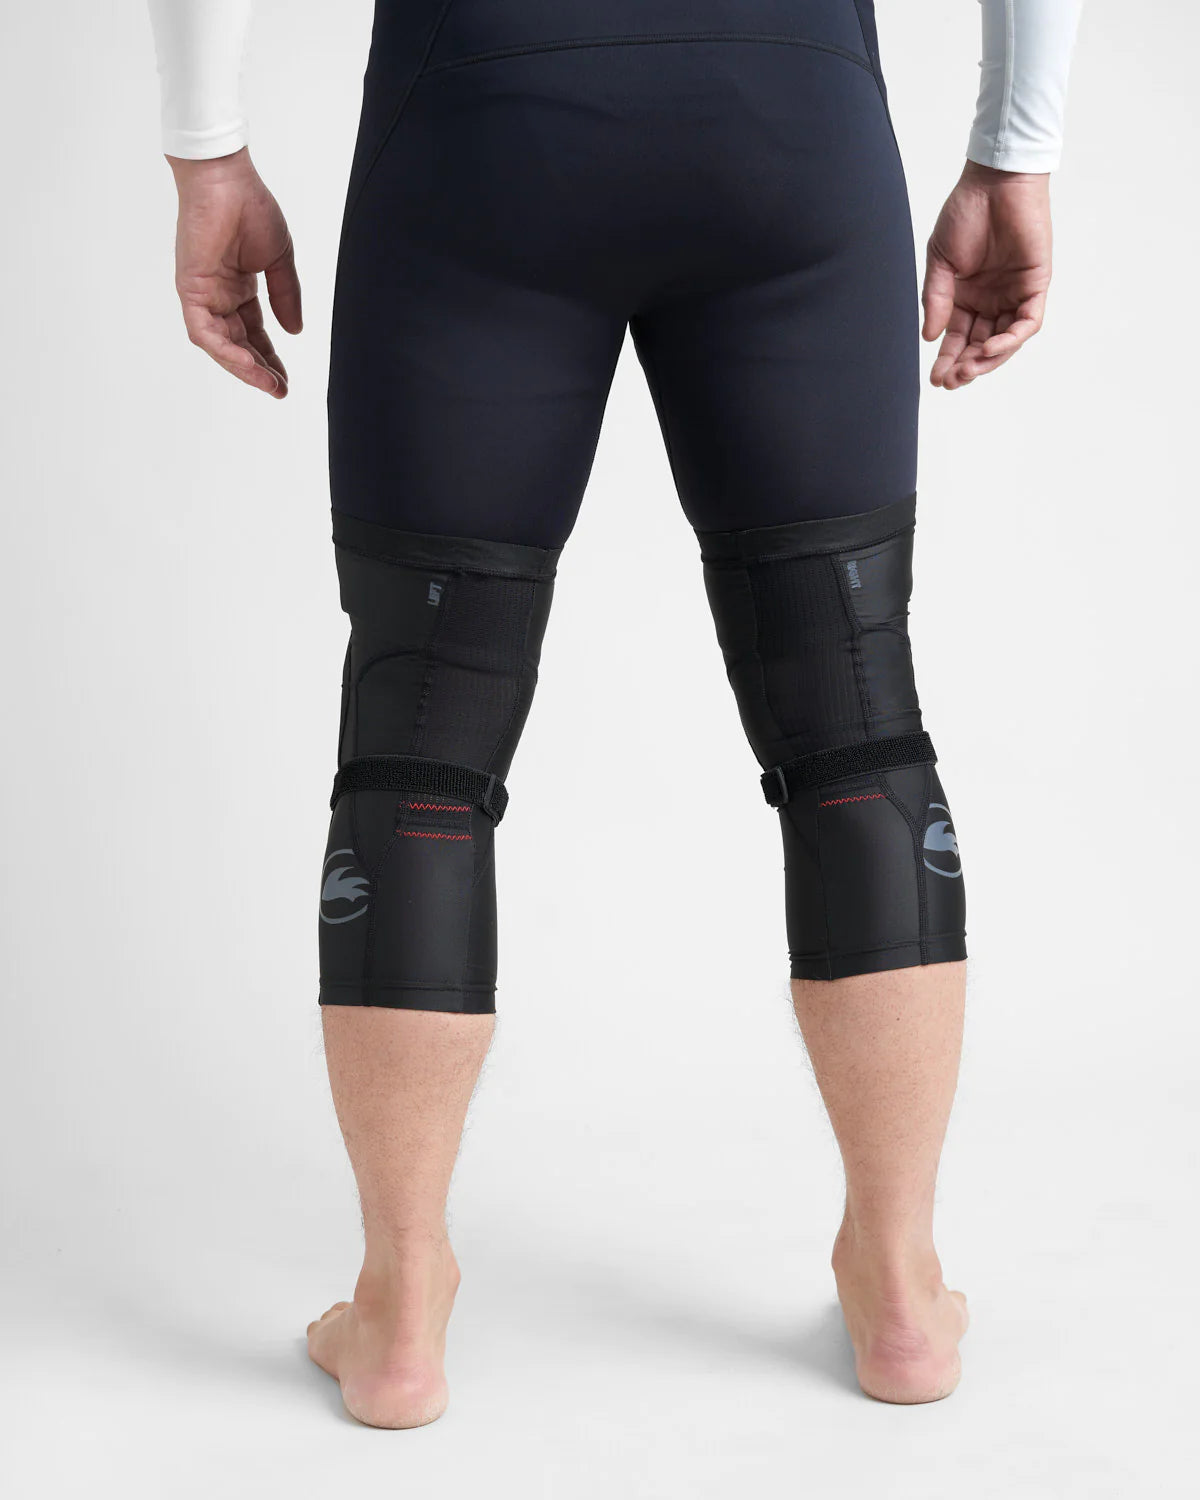 Rooster Race Armour Knee Pads